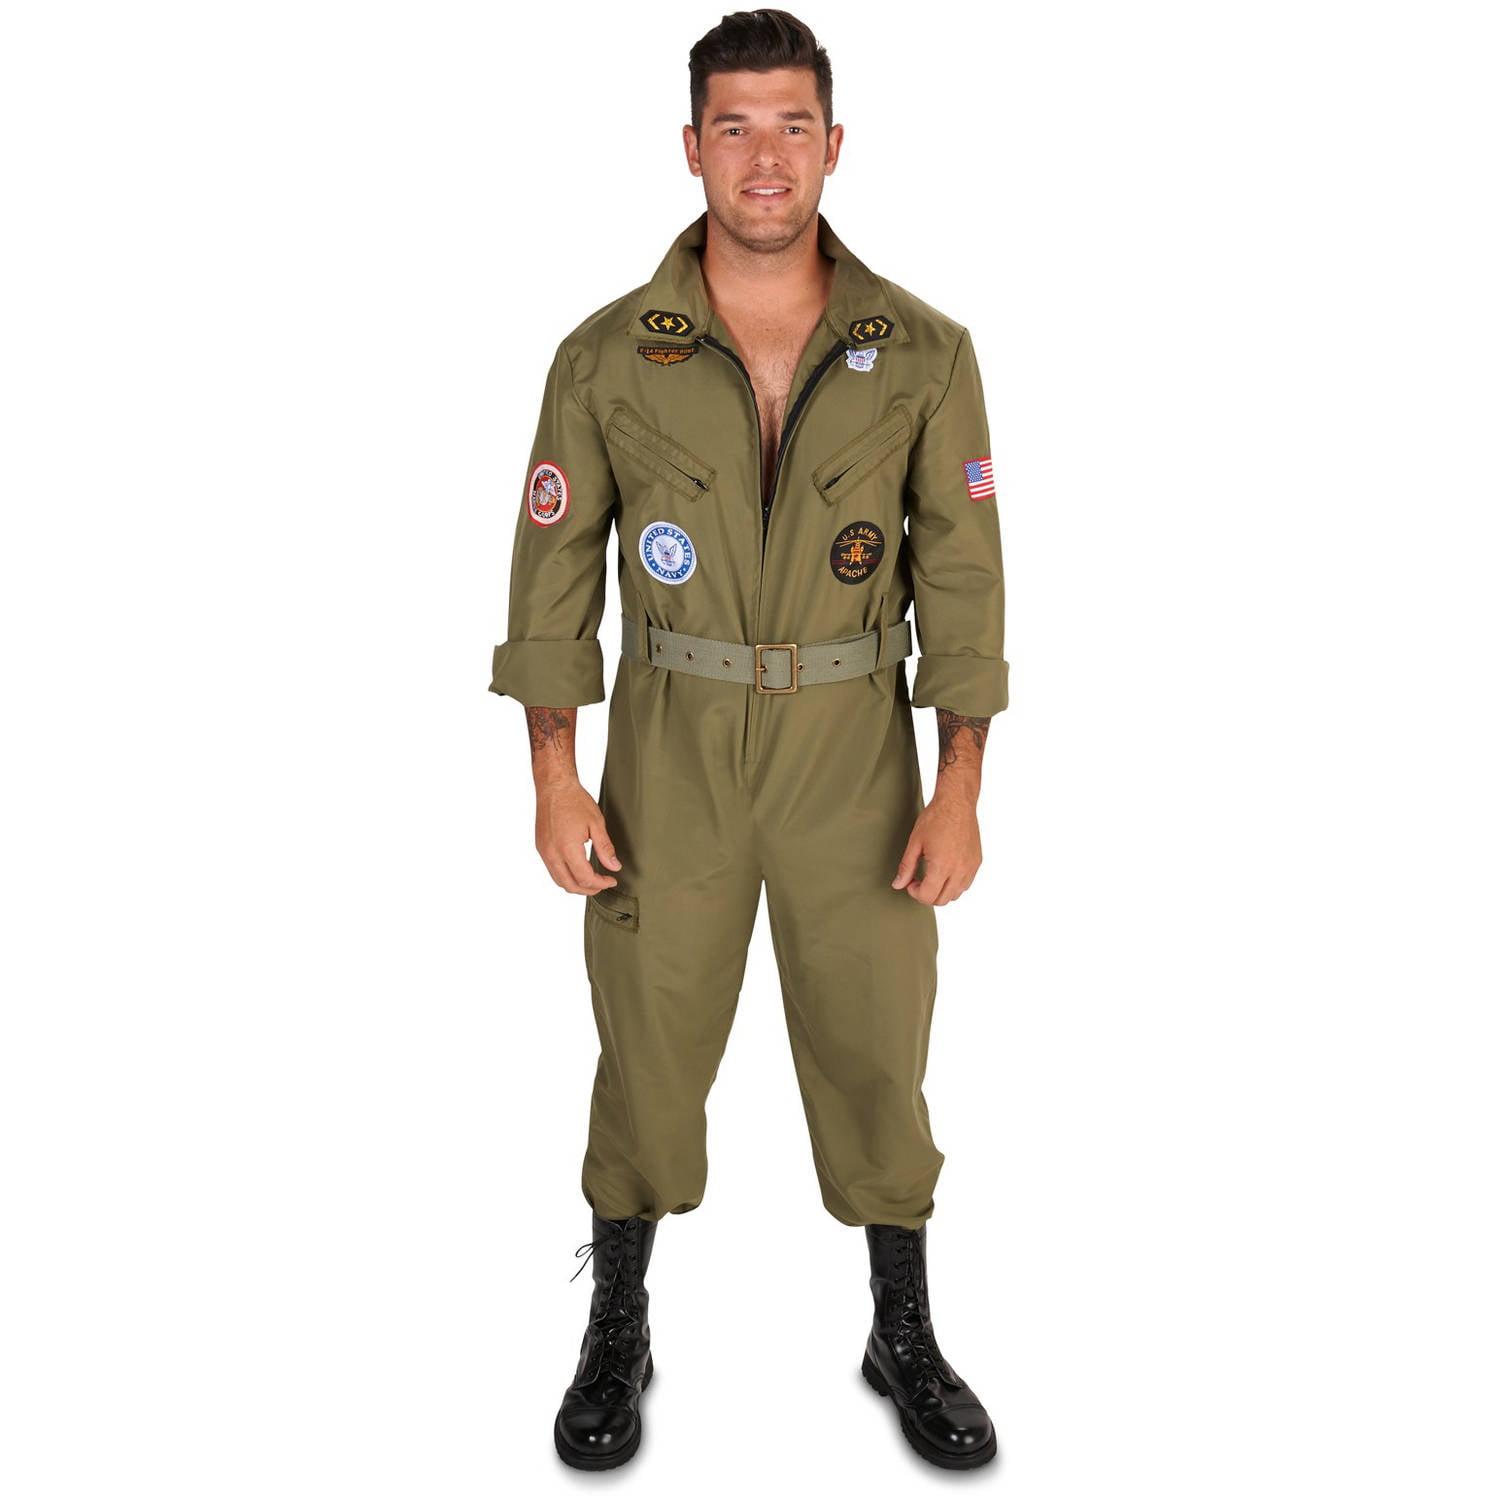 Halloween Express Men's Airforce Jumpsuit Costume - Size One Size Fits Most  - Green : Target